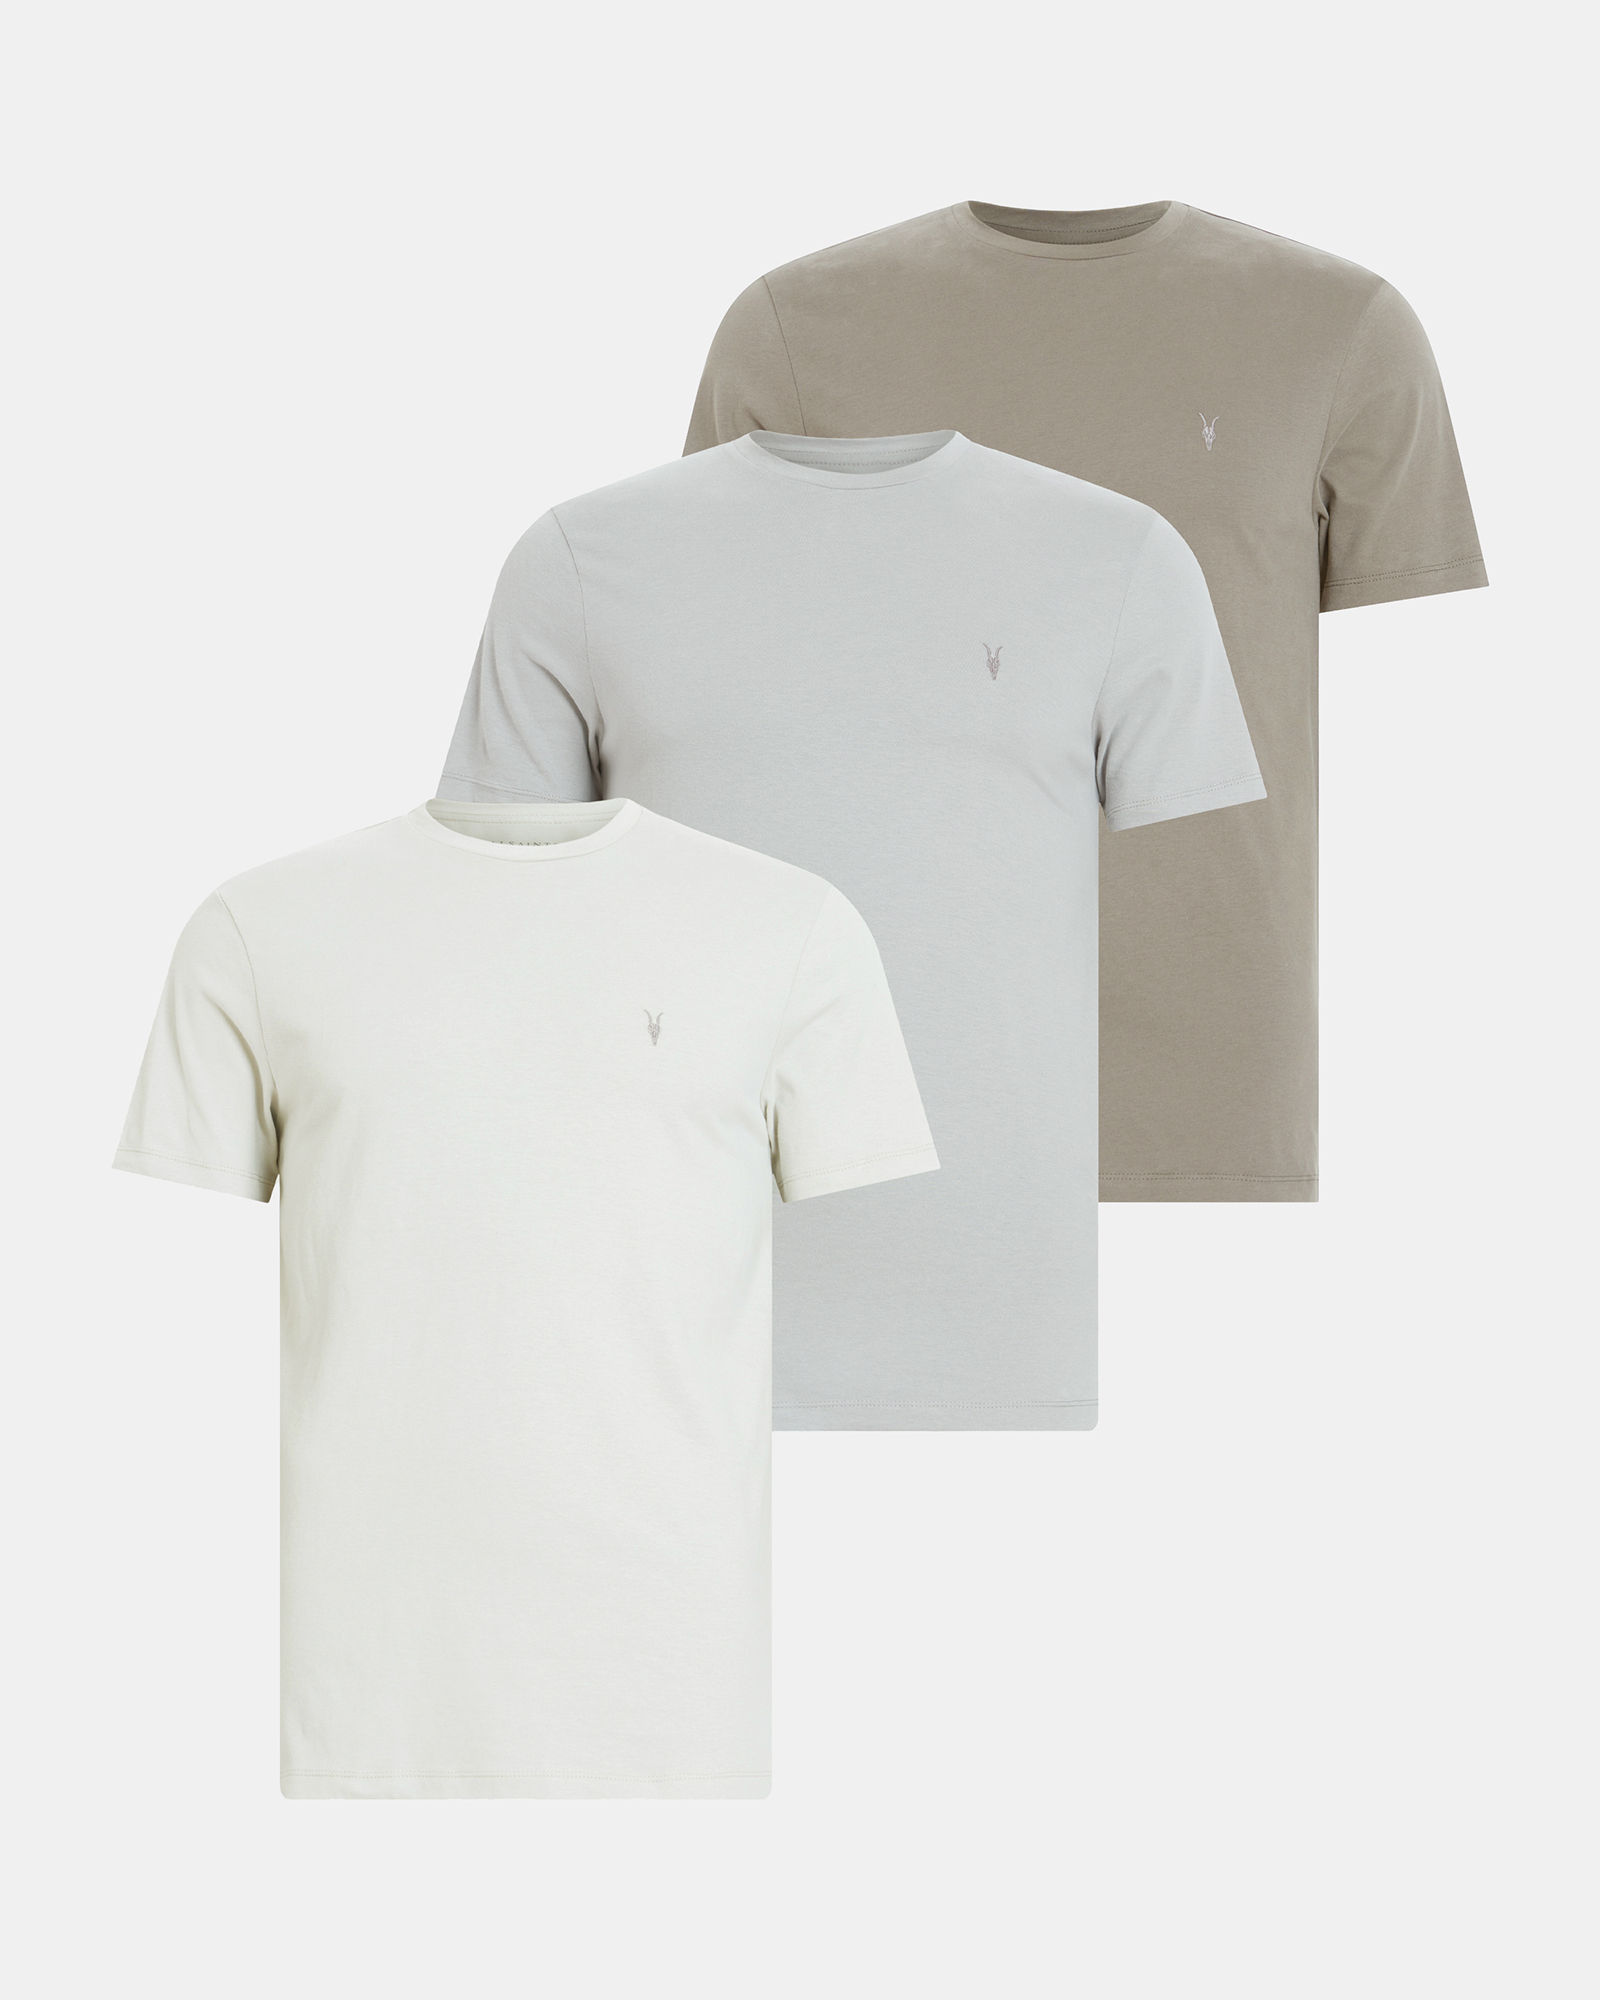 AllSaints Brace Brushed Cotton T-Shirts 3 Pack,, GREEN/TAUPE/GREY